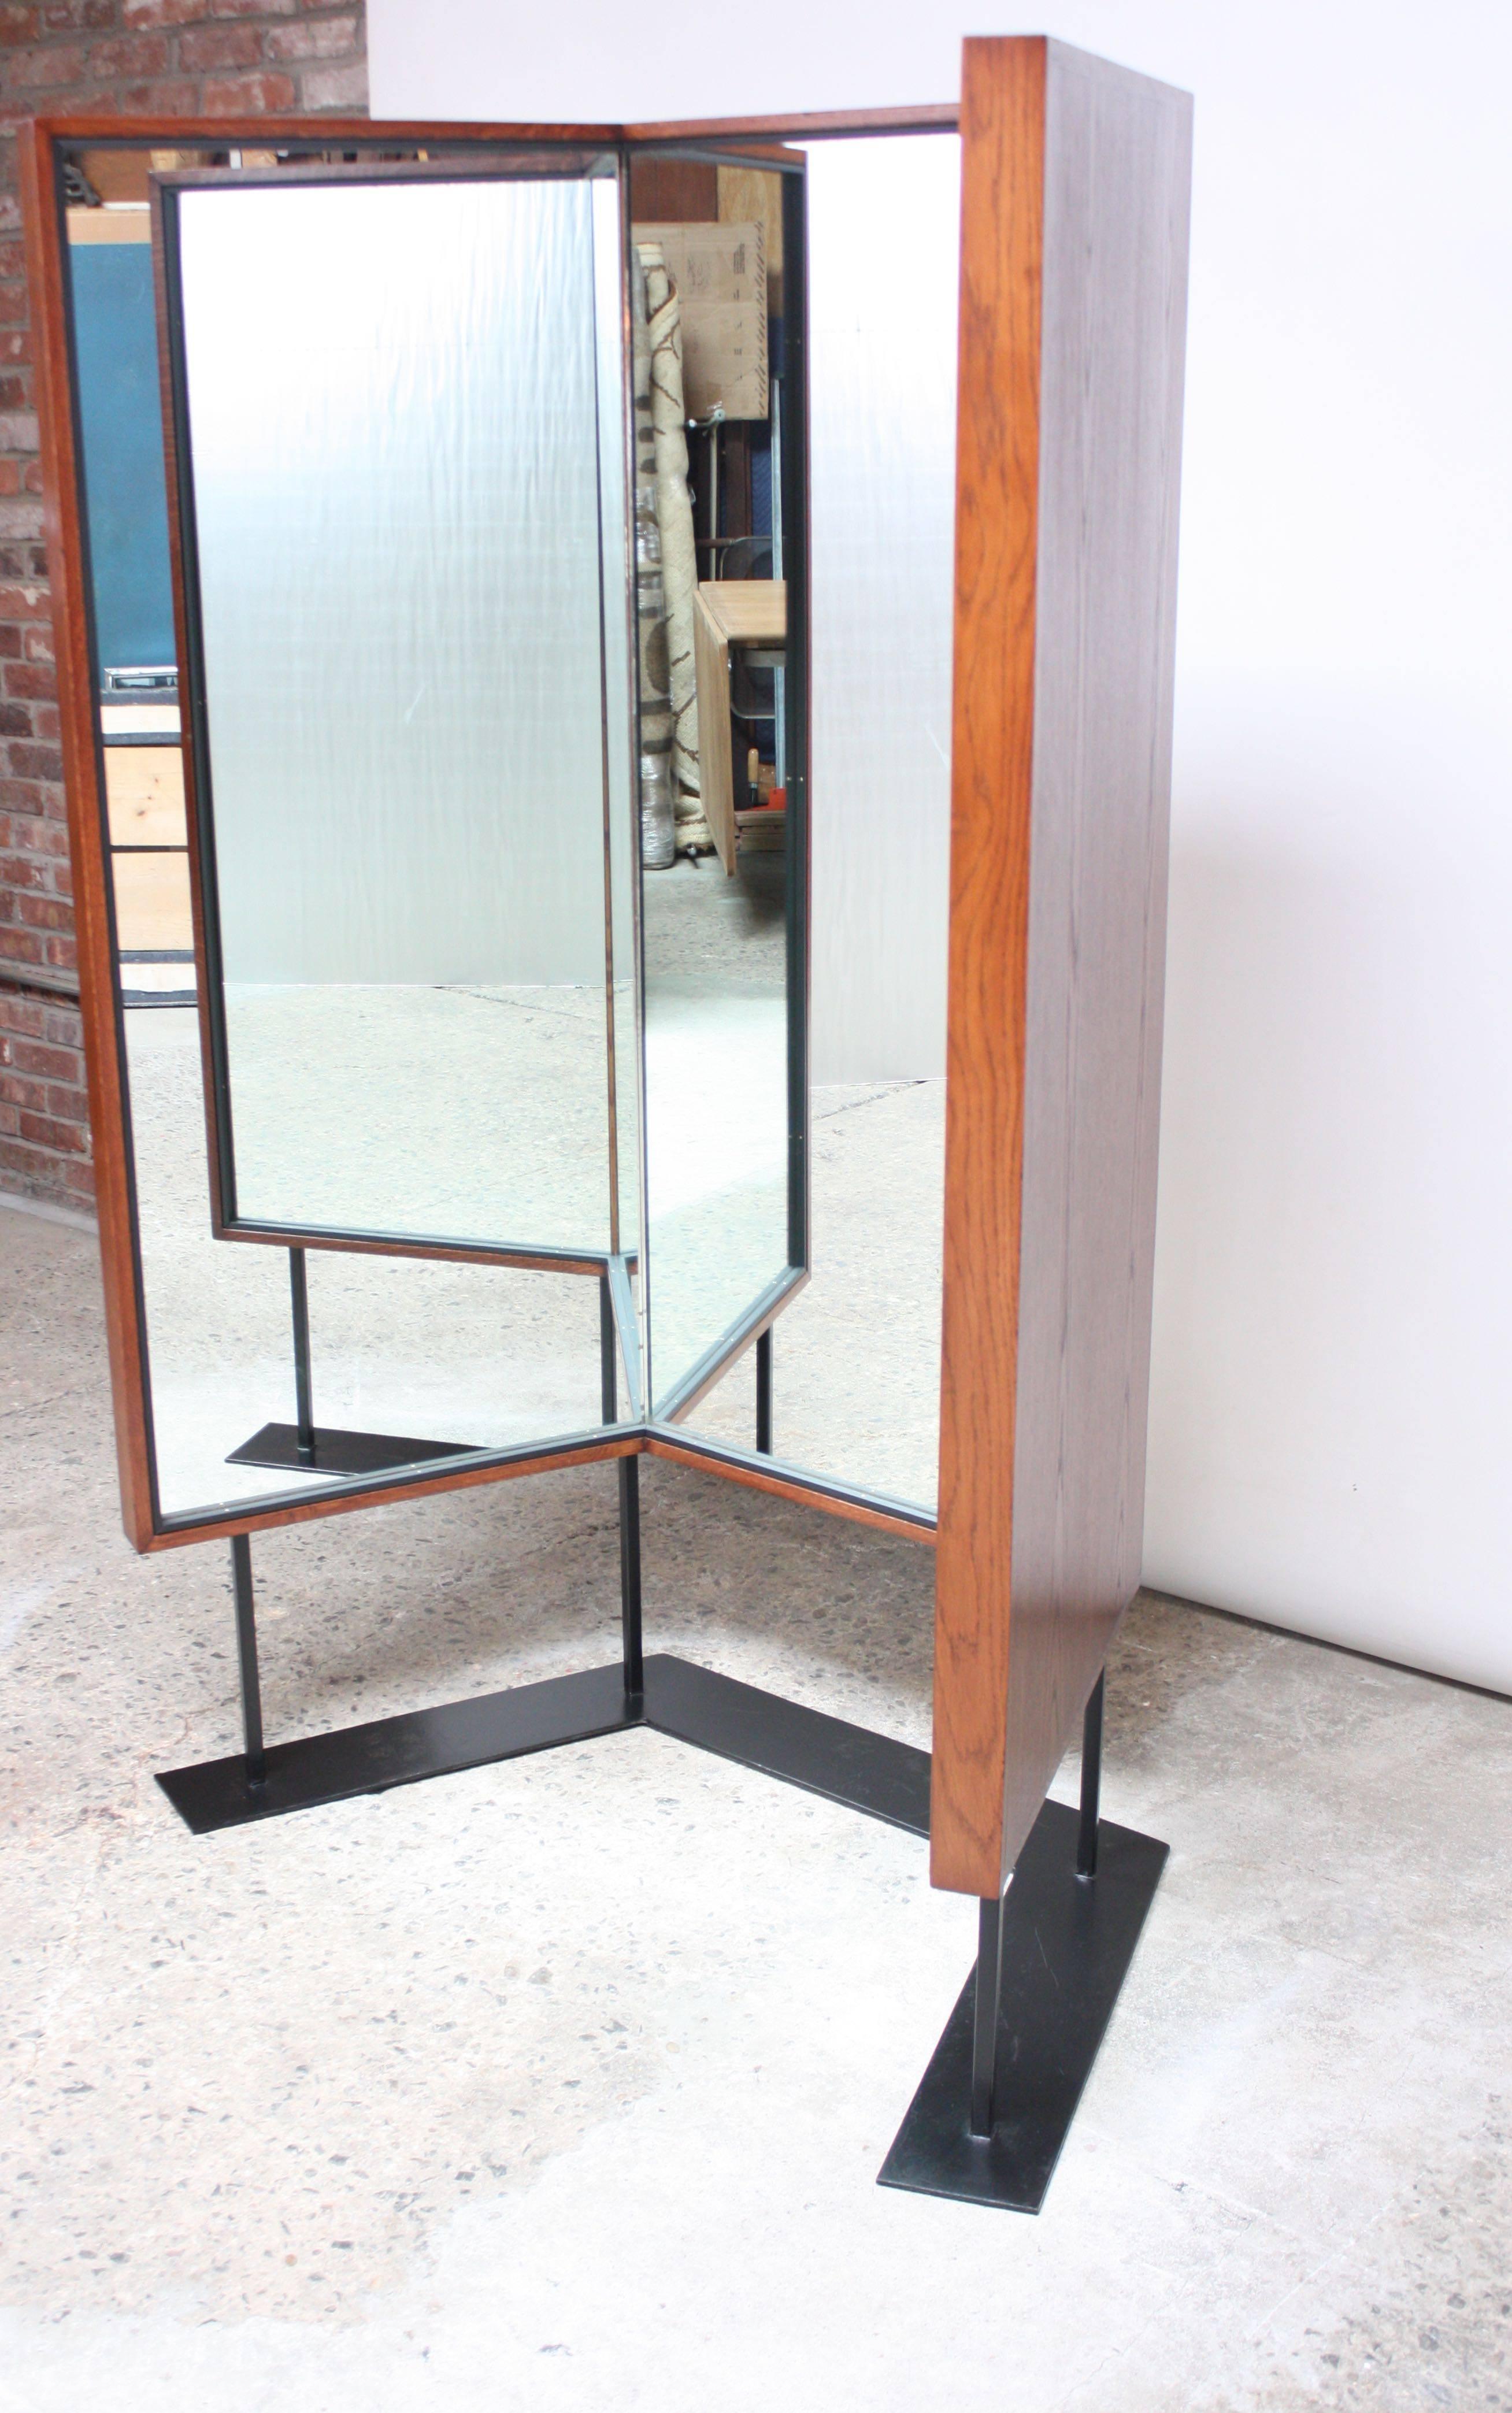 Unique-form, custom-made (MA carpenters' union) large tri-panel floor mirror with a stained ash frame, painted black steel base and three separate mirrored glass panels. Despite its tri-fold appearance, the mirror is stationary and the panels do not